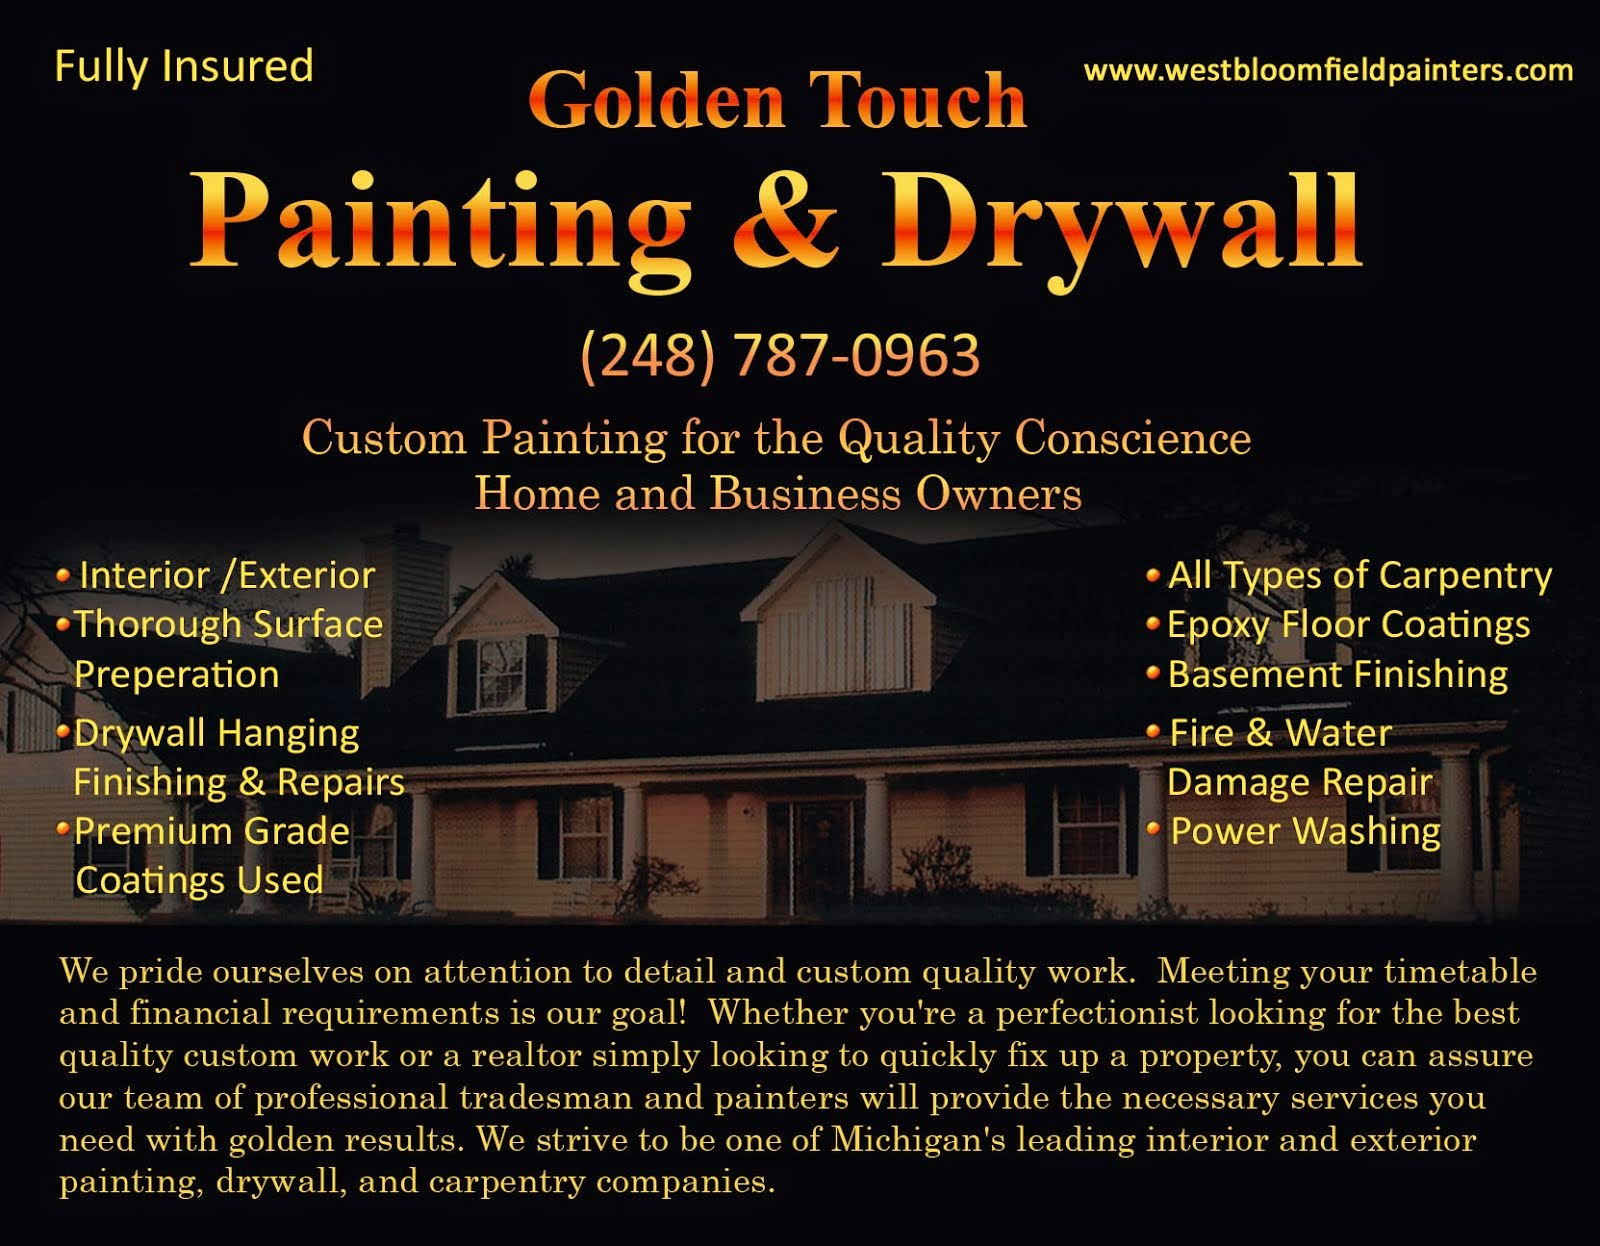 One of Oakland Counties most prestigious painting company